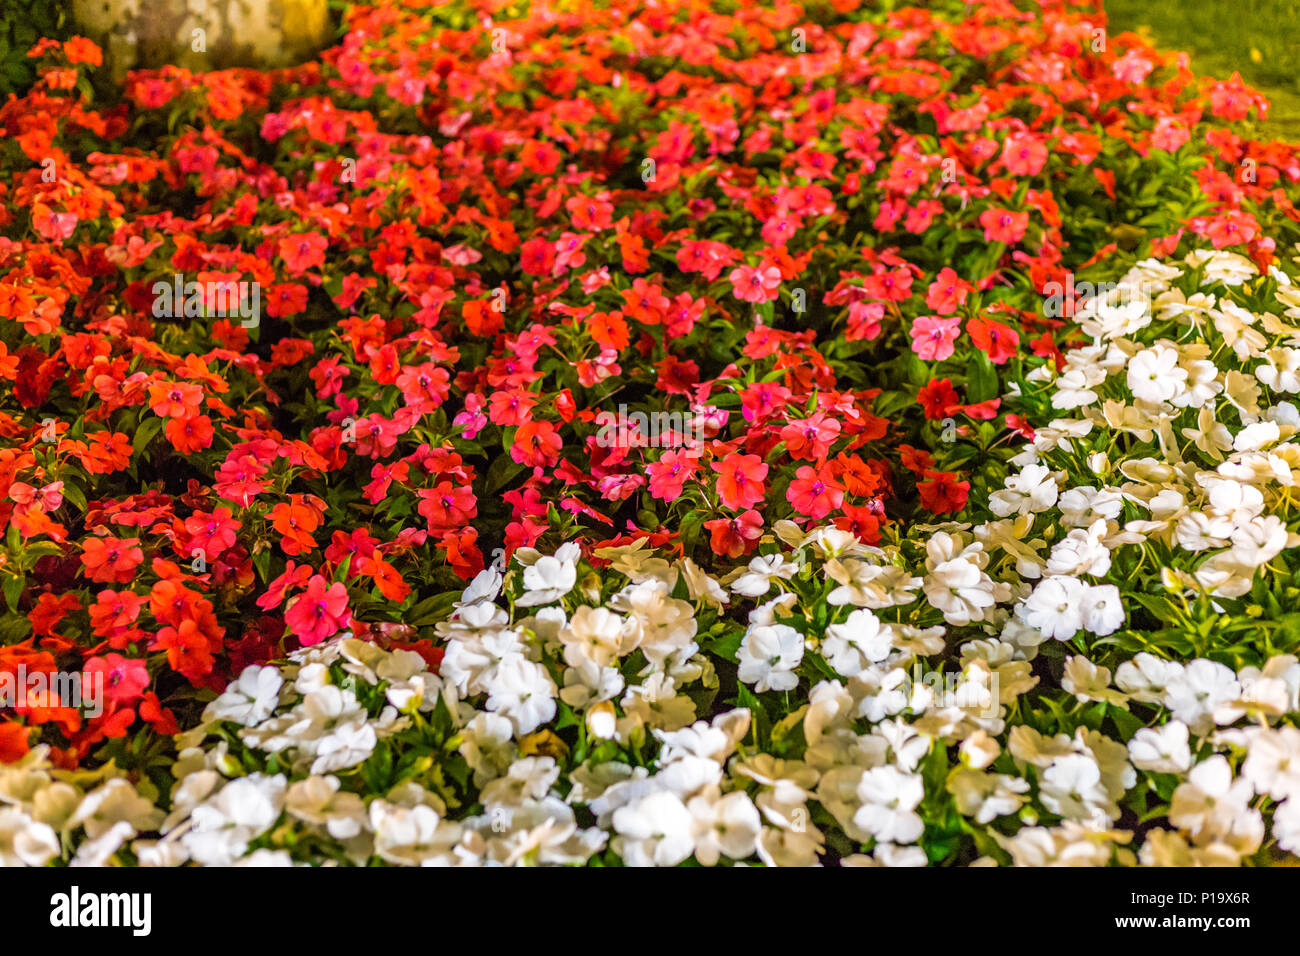 background of red and white flowers with green leaves Stock Photo